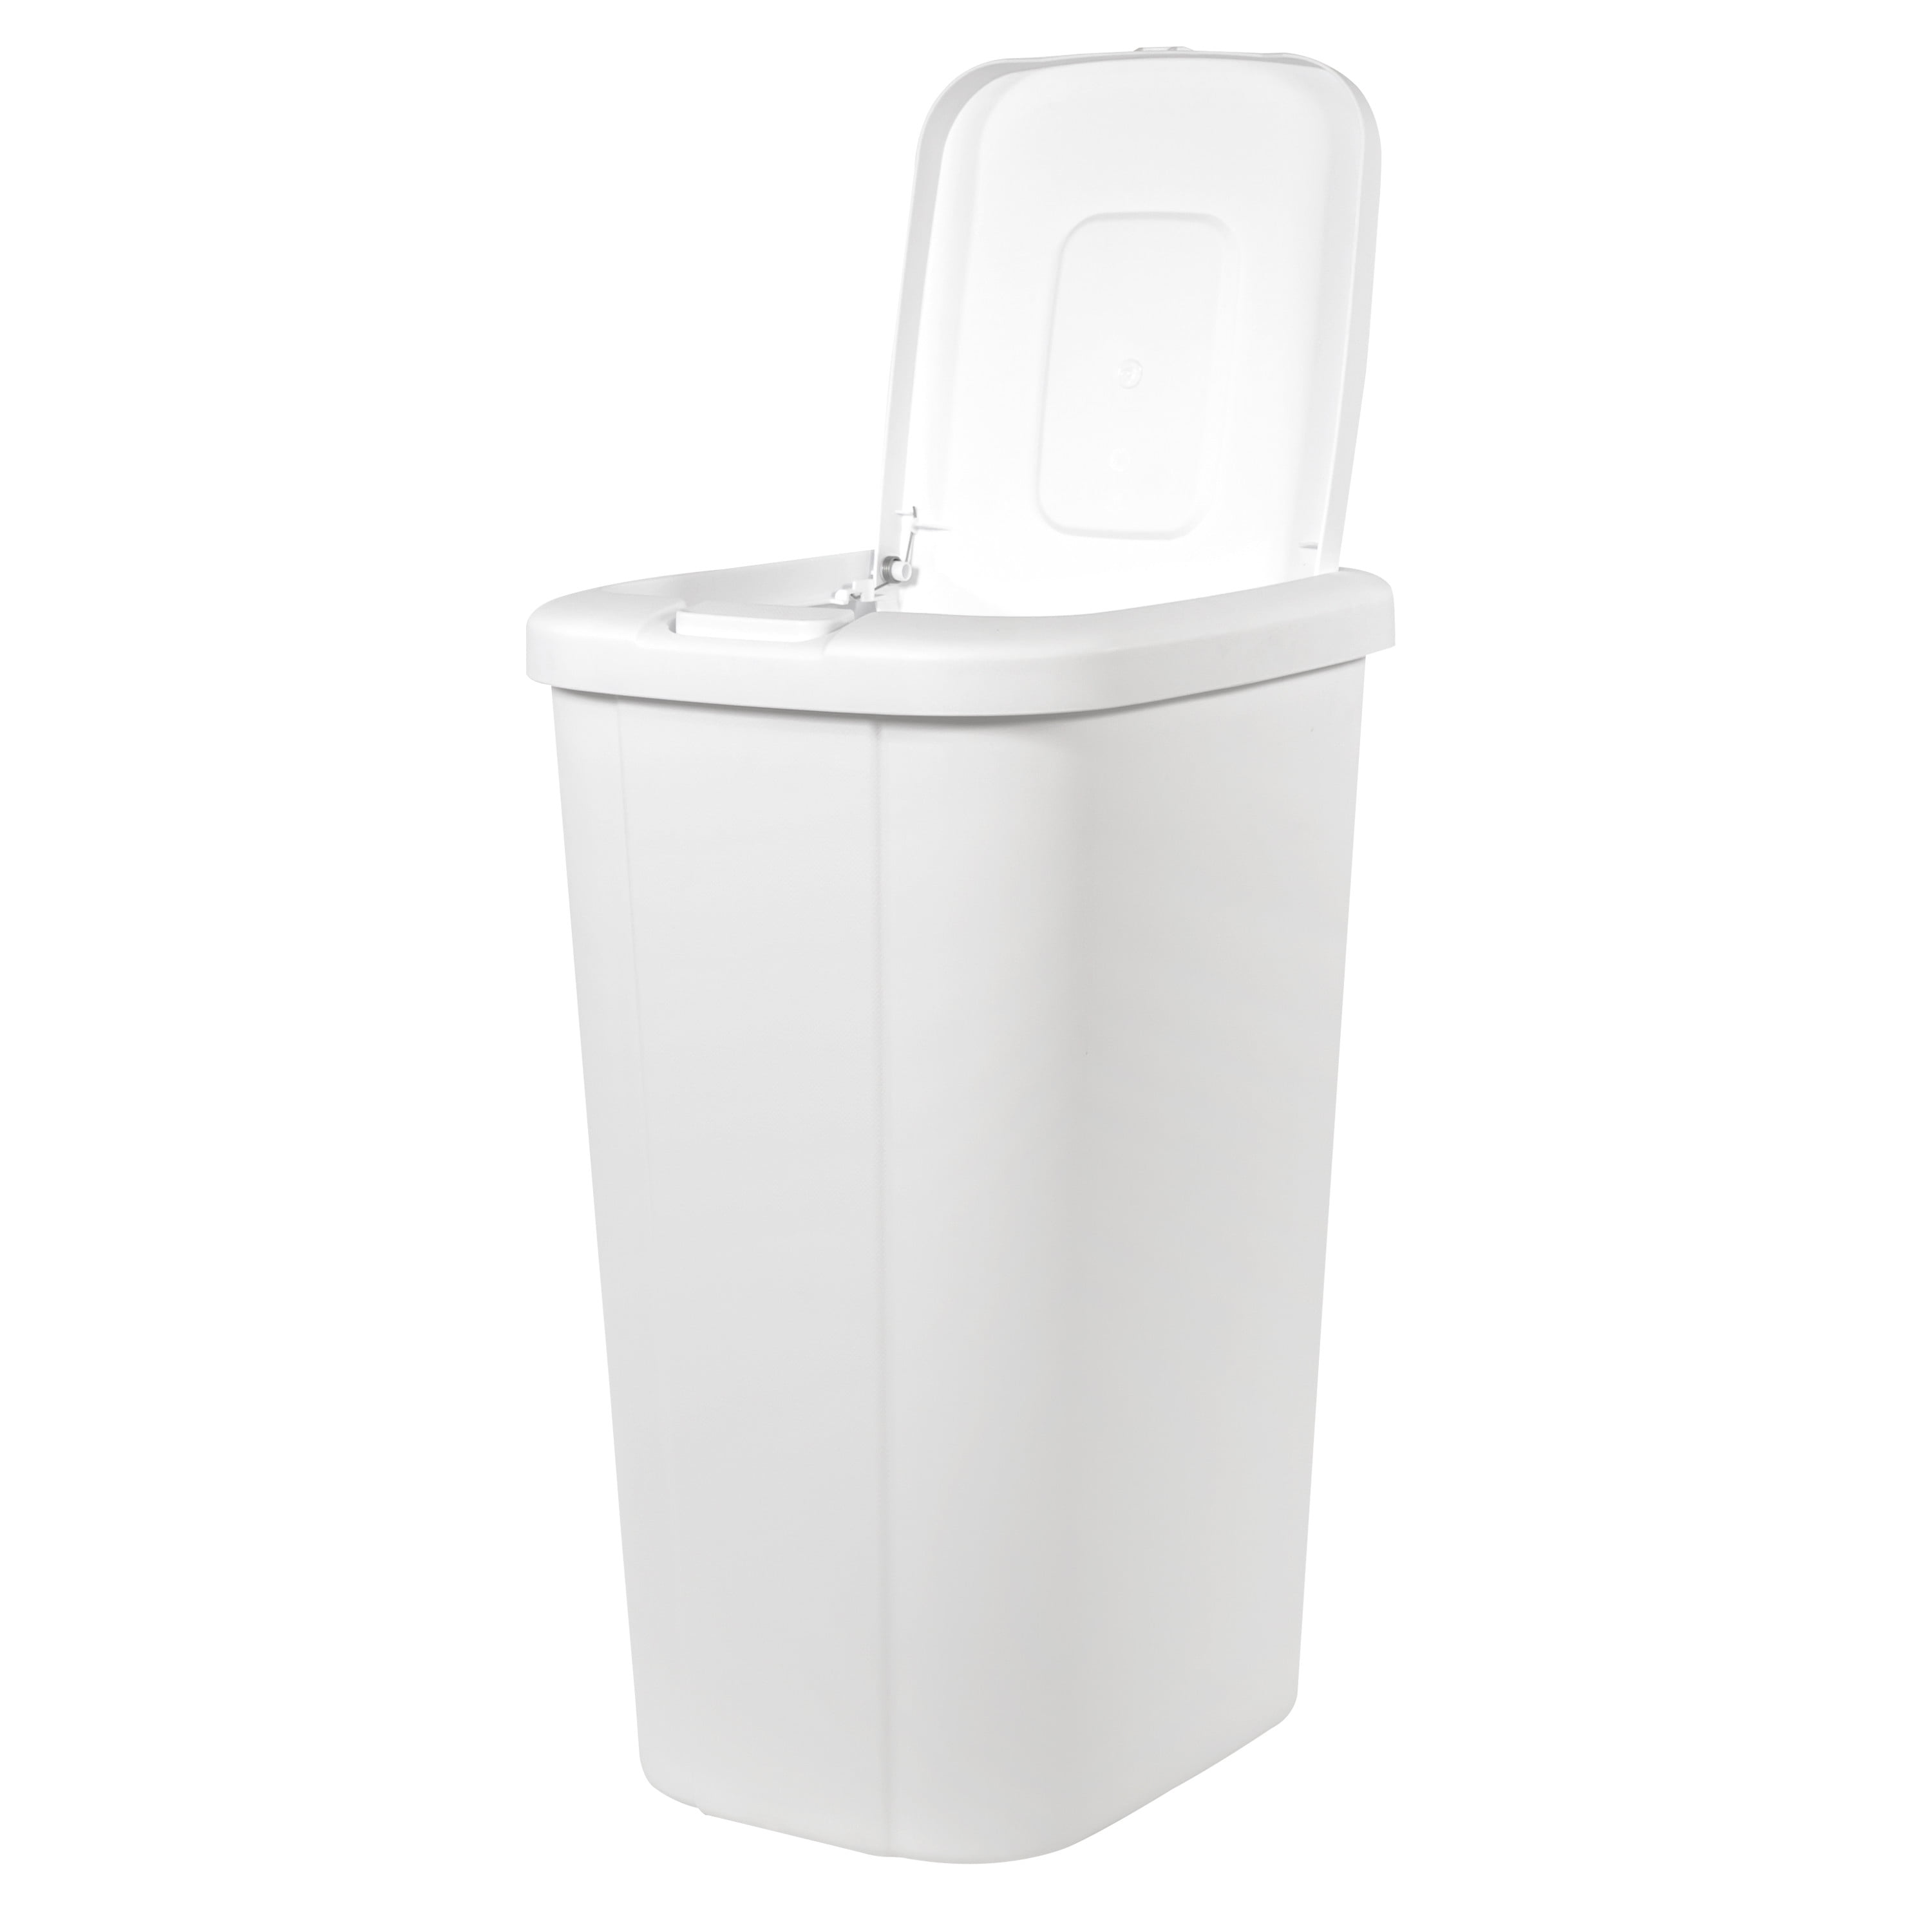 Hefty 13.3 Gallon Trash Can, Plastic Touch Top Kitchen Trash Can, White 